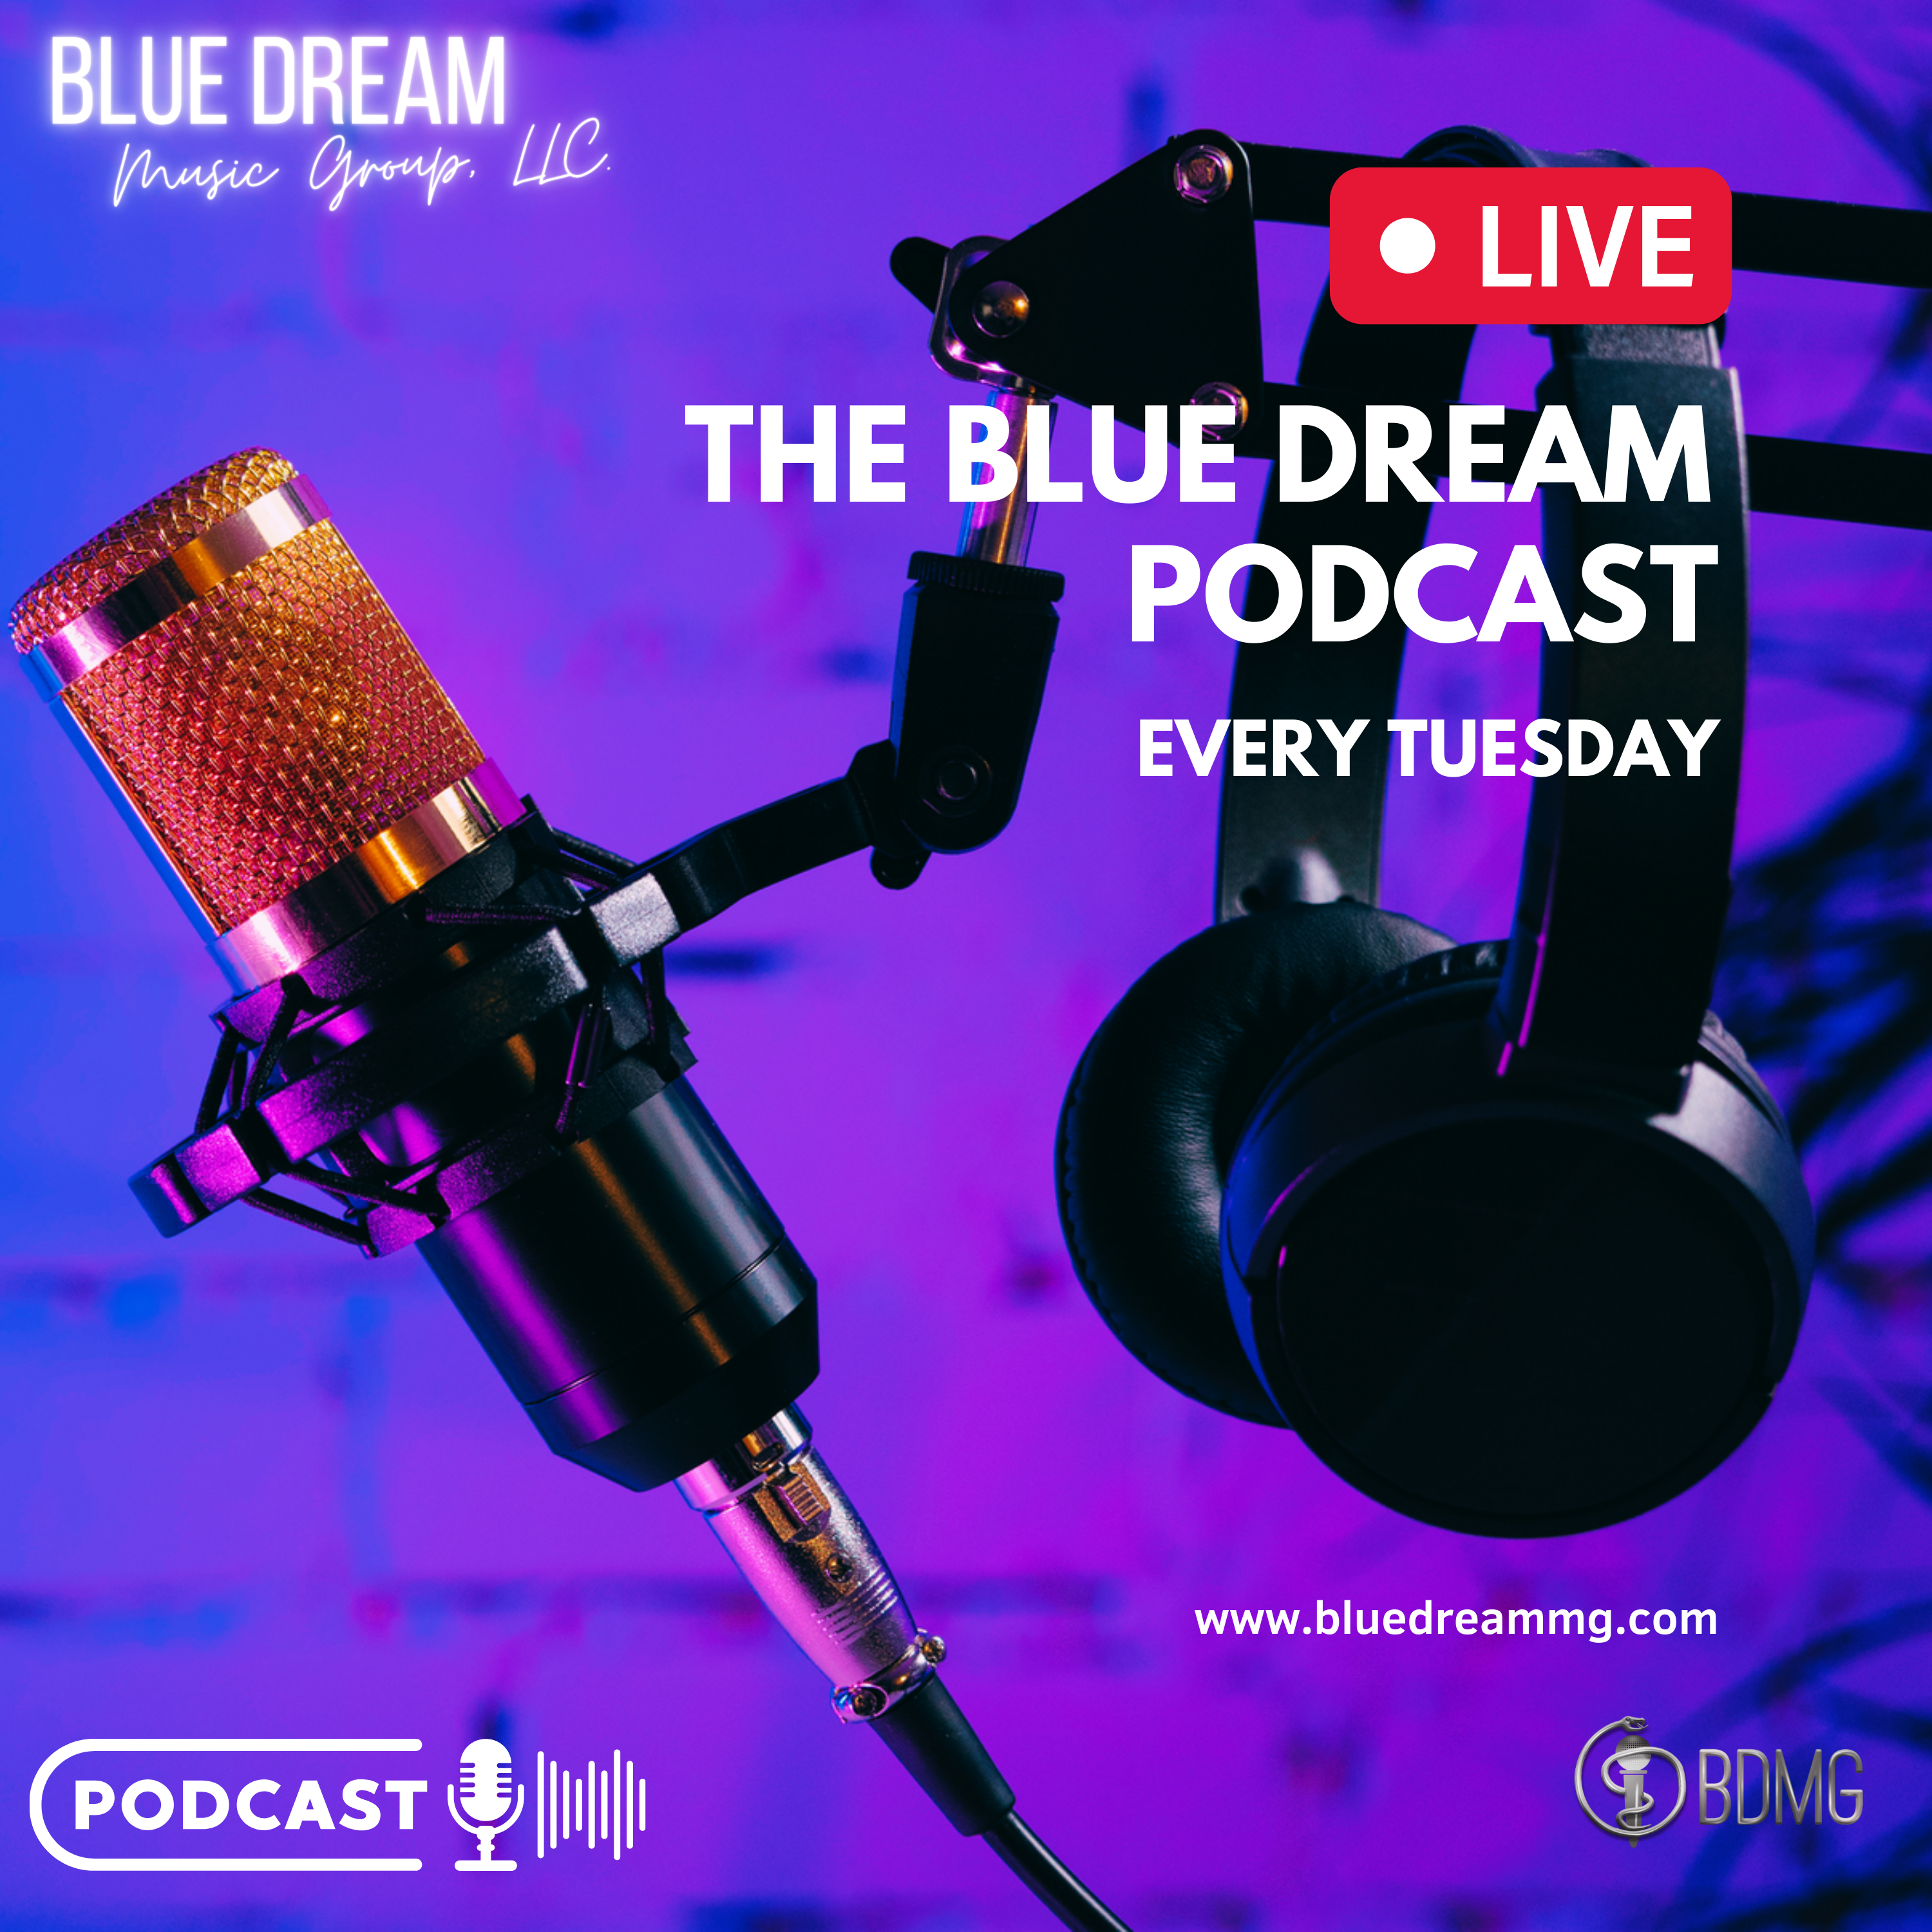 The First Blue Dream Music Group Podcast